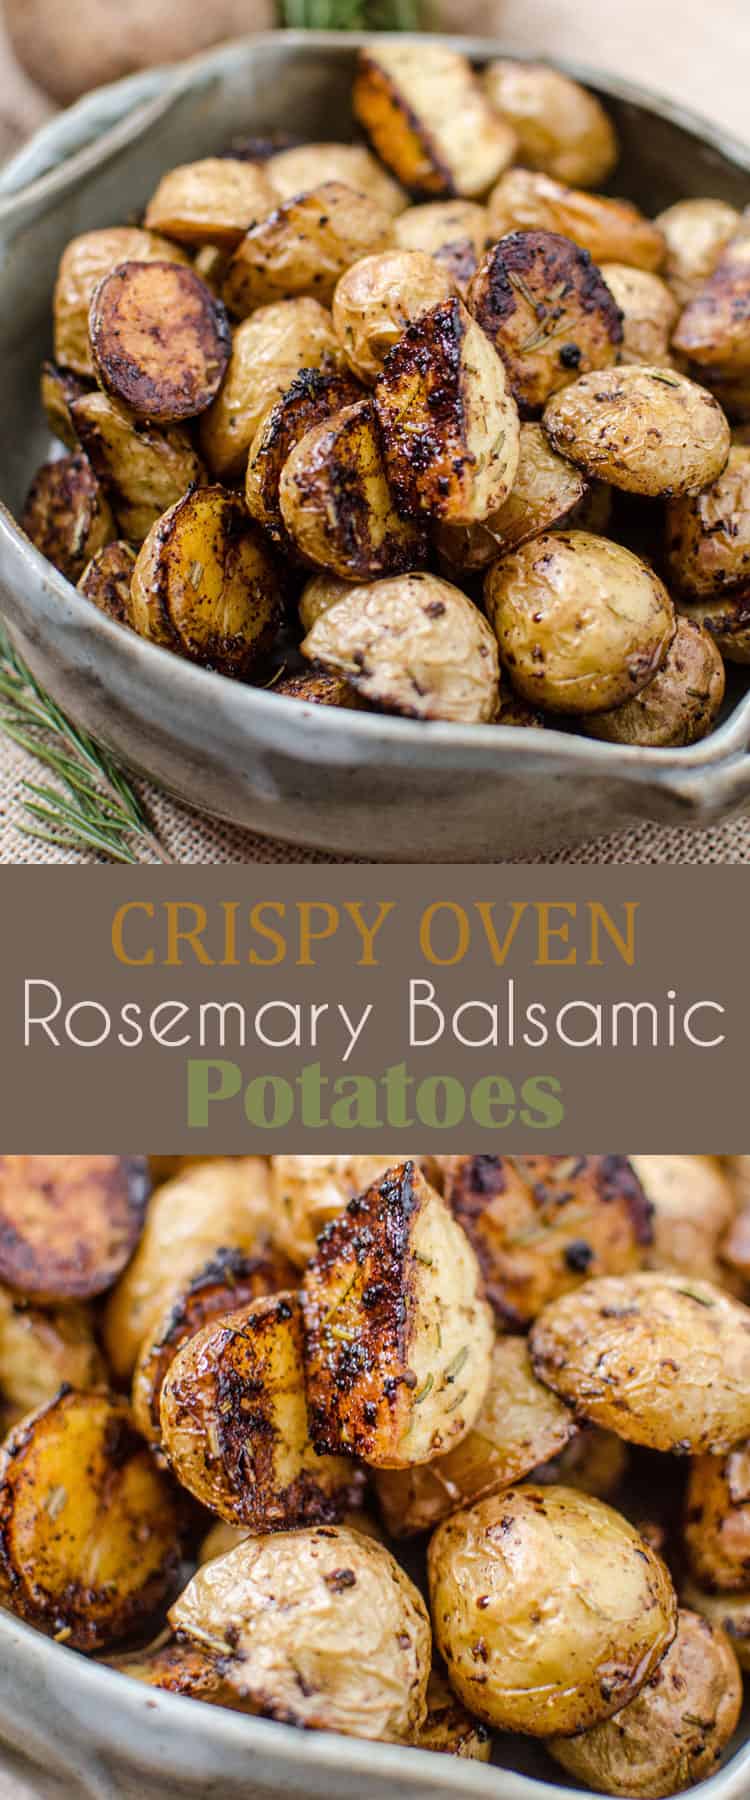 Crispy Oven Rosemary Balsamic Potatoes - slightly sweet from the caramelization on the bottoms with a savoury taste from the spices 